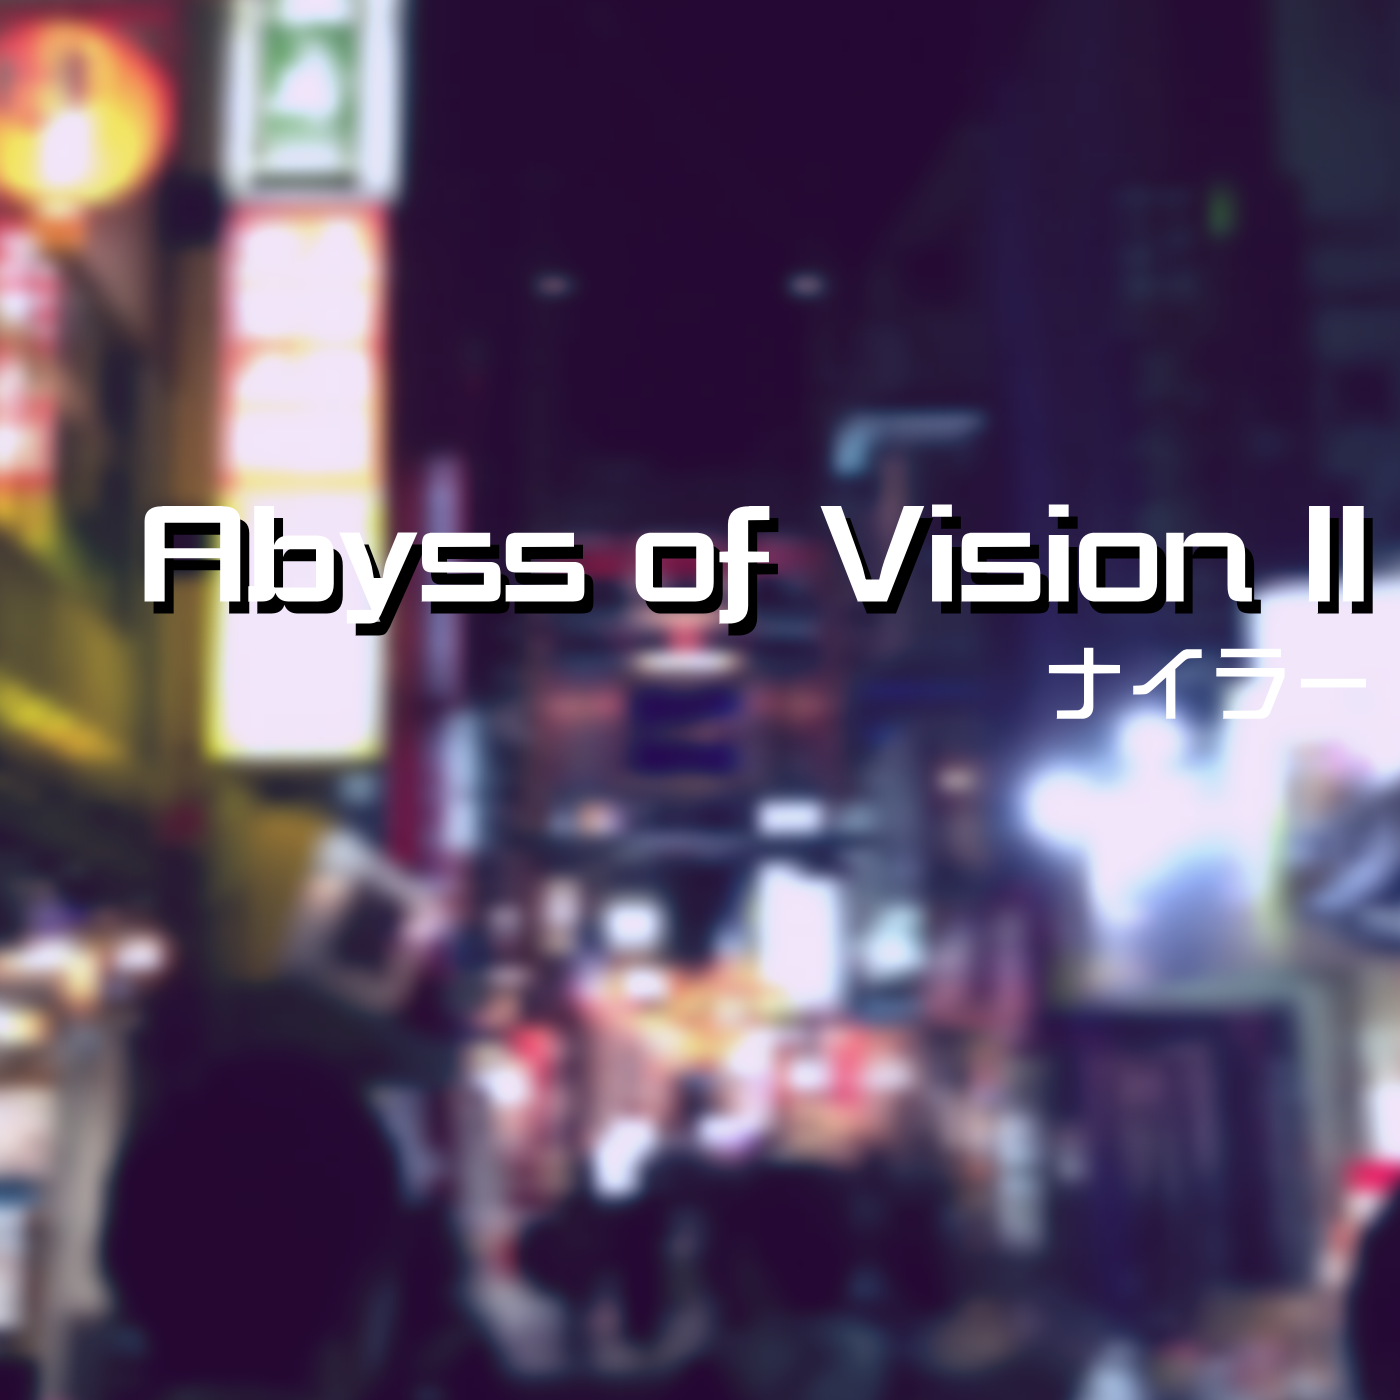 Abyss of Vision Ⅱ